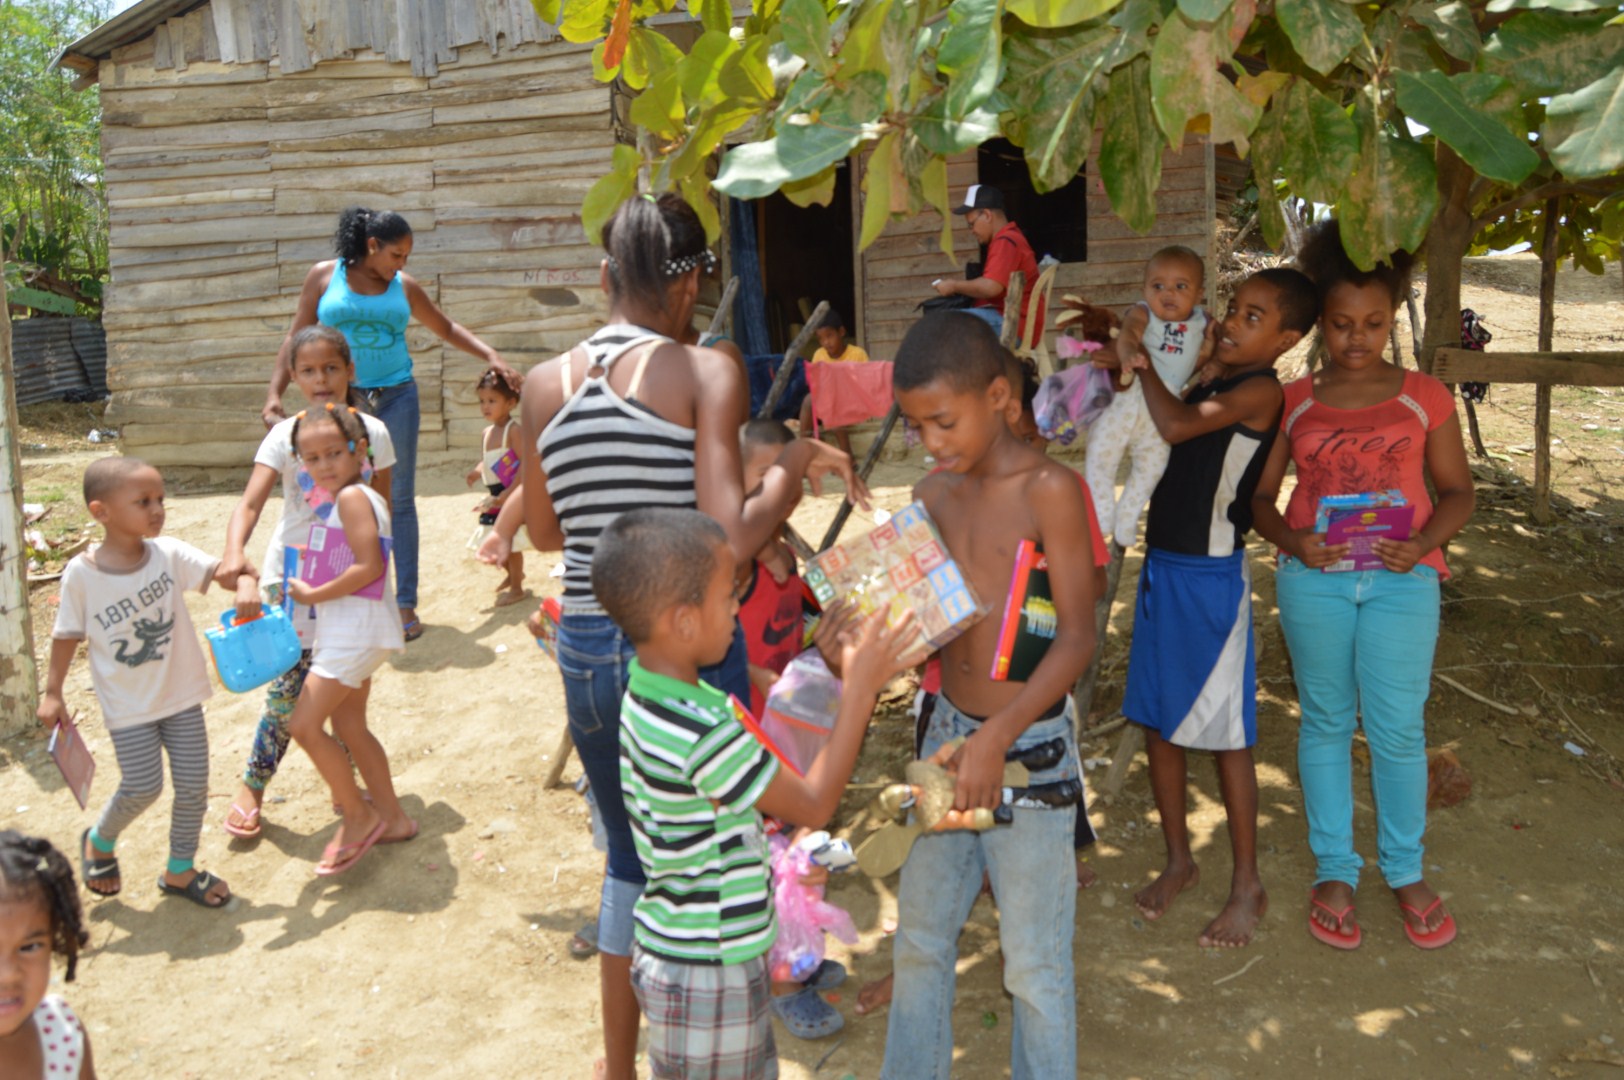 Children showing and playing with their toys outside under the shade of a tree